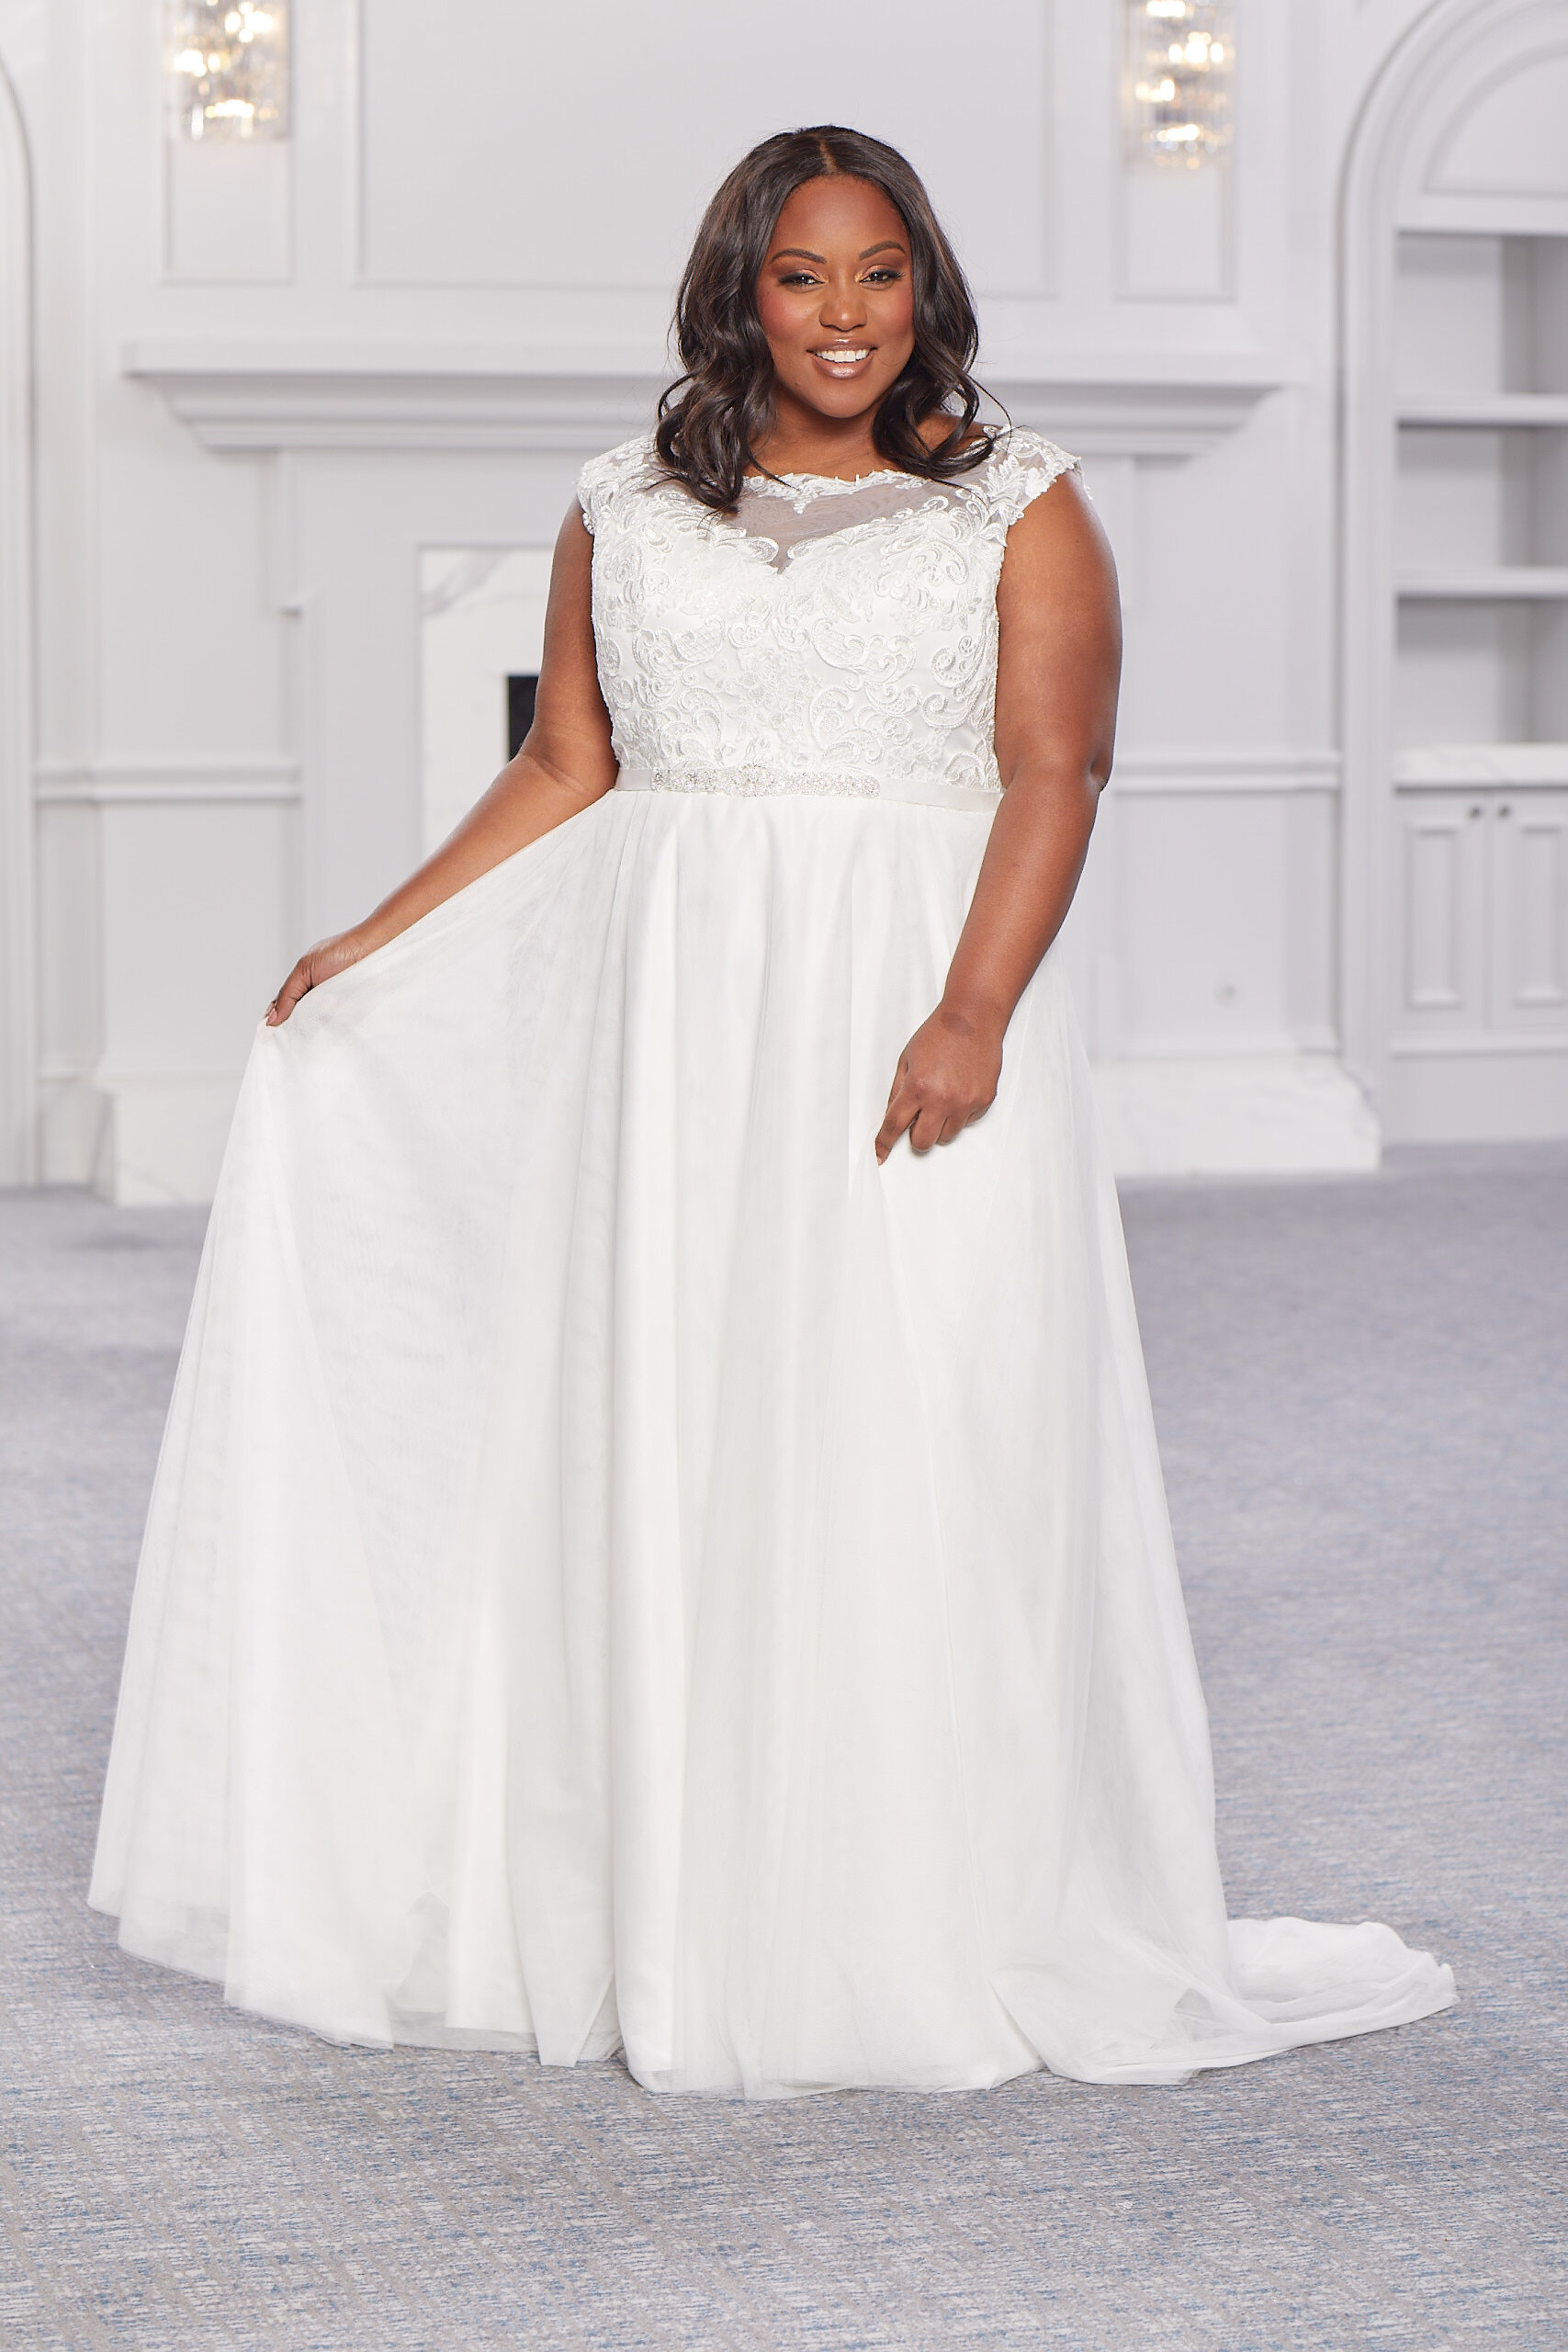 Brides-by-Young-Plus-Size-Bridal-Curvy-Wedding-Dress-New-Jersey-Indiana-Chicago-Illinois-ARIEL_1667.jpg